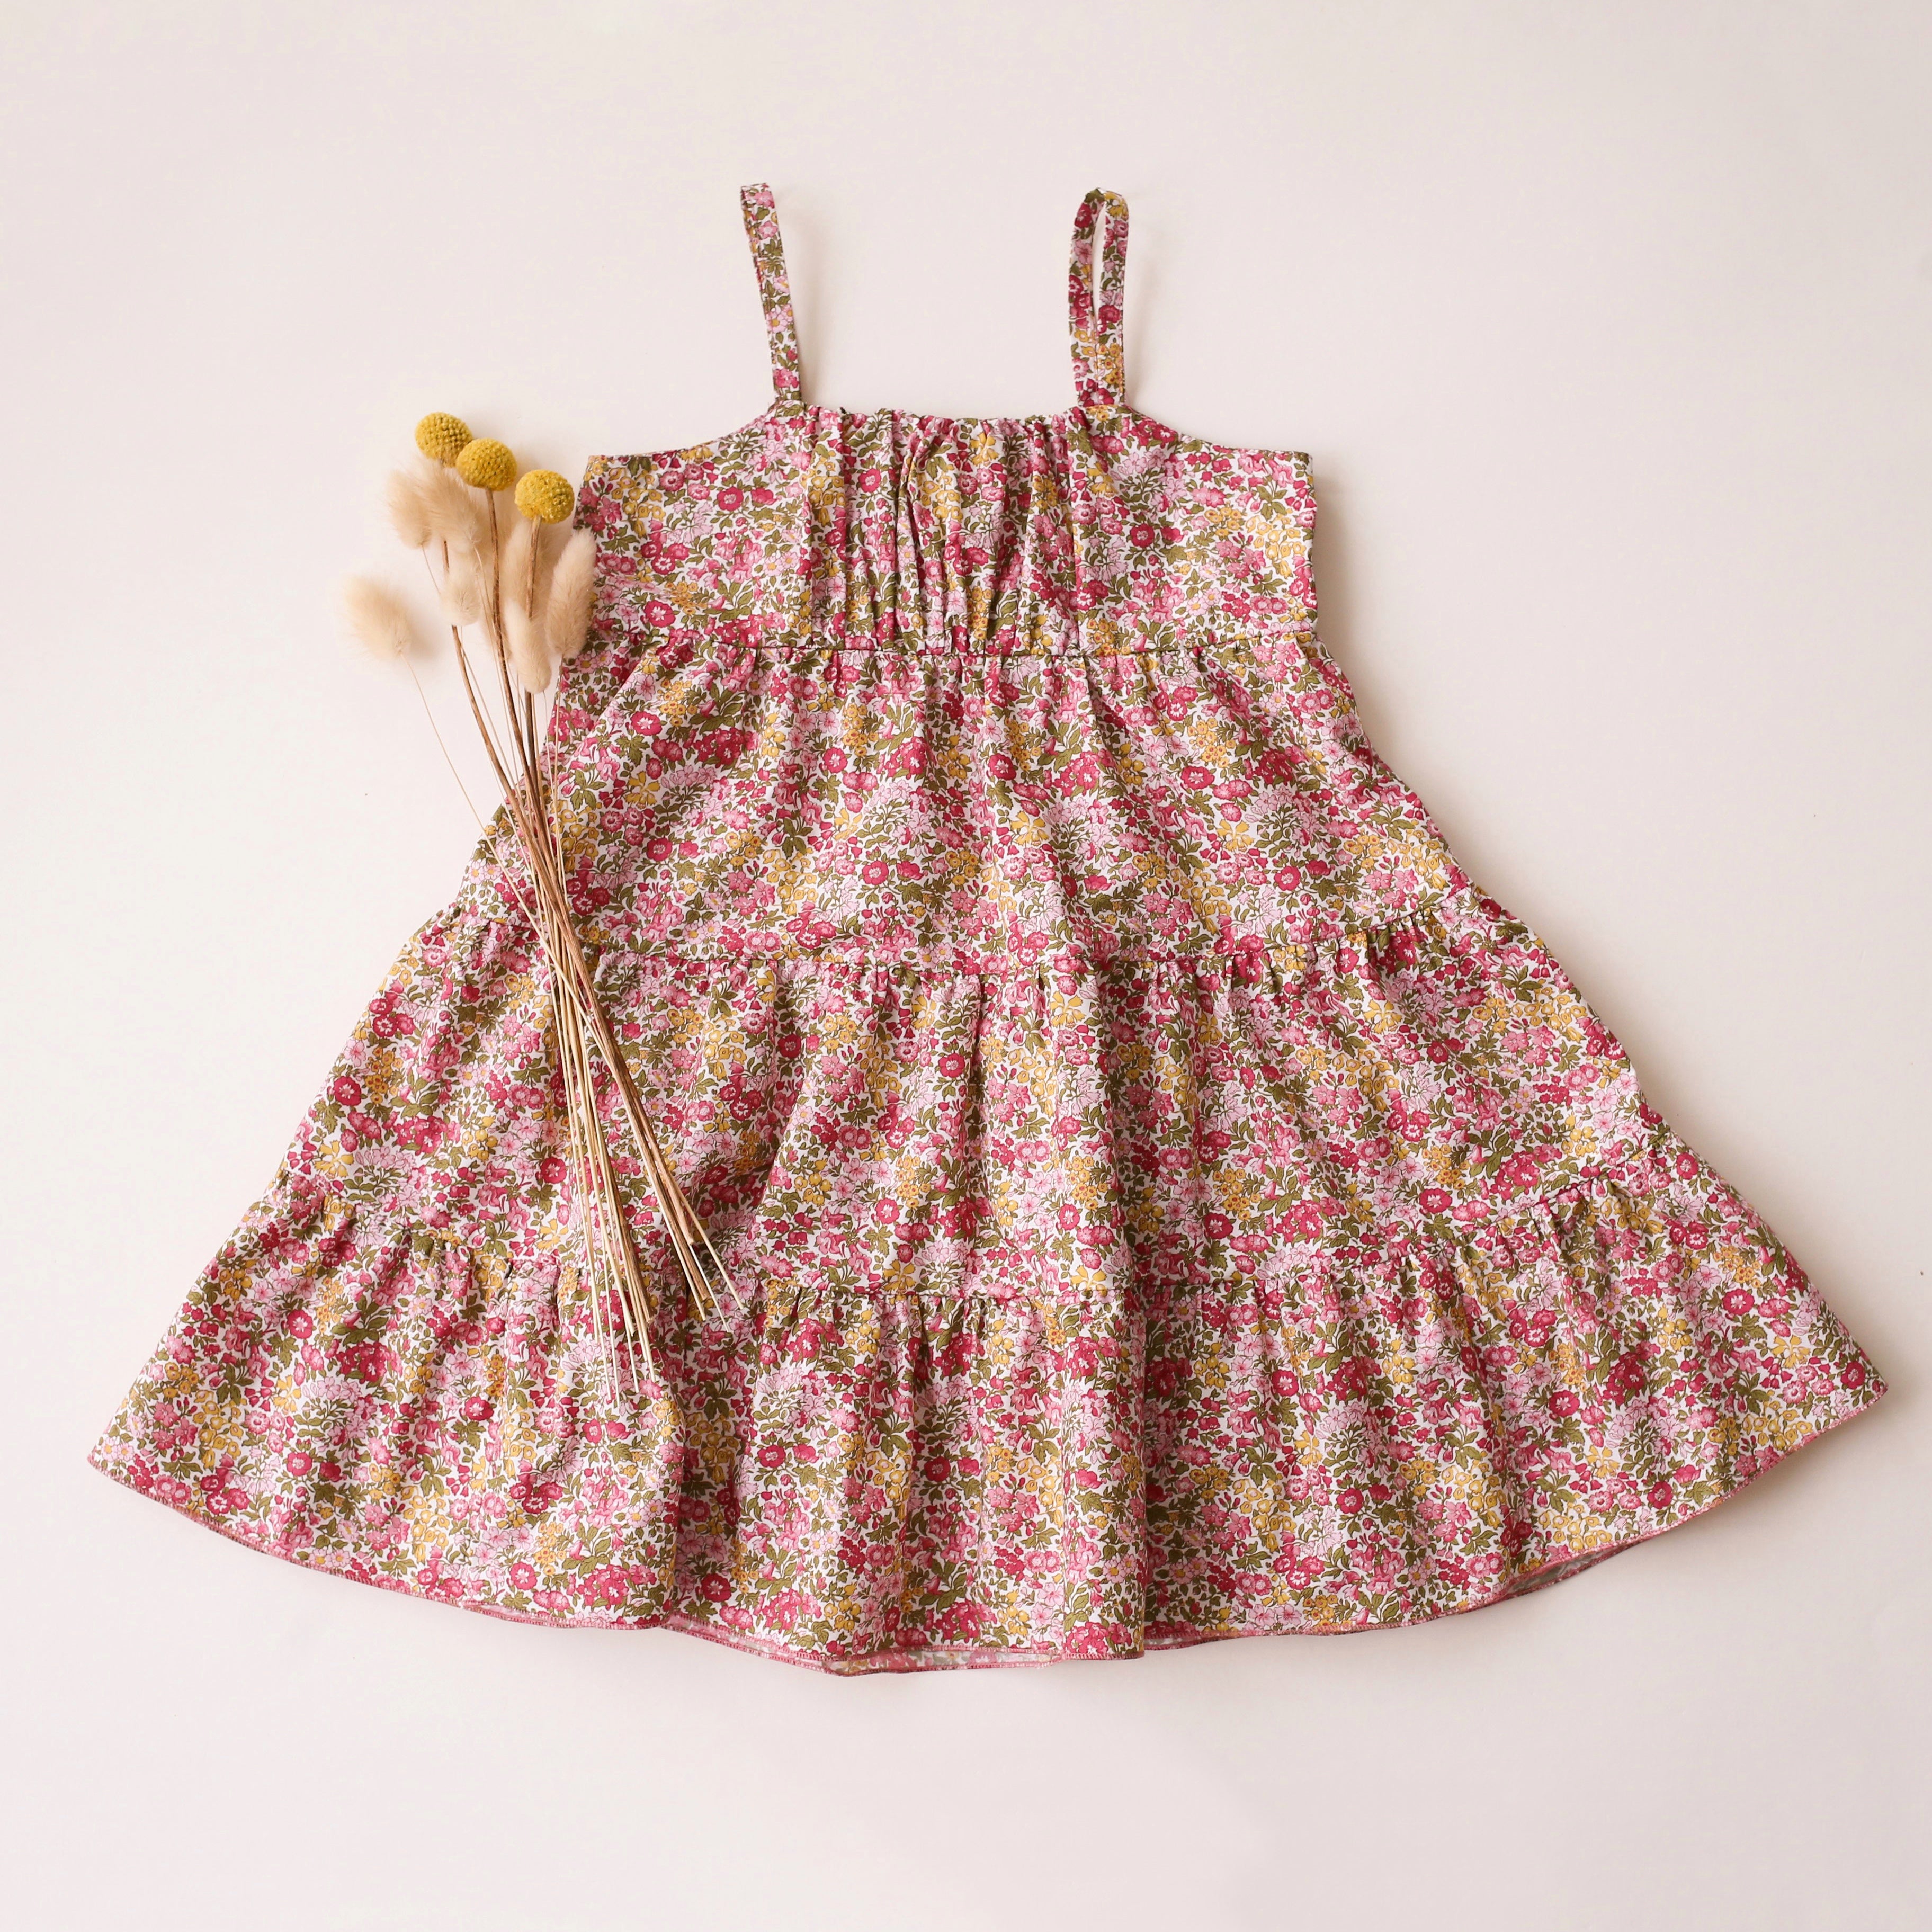 Penstemon Road Tiered Dress with Gathered Bodice